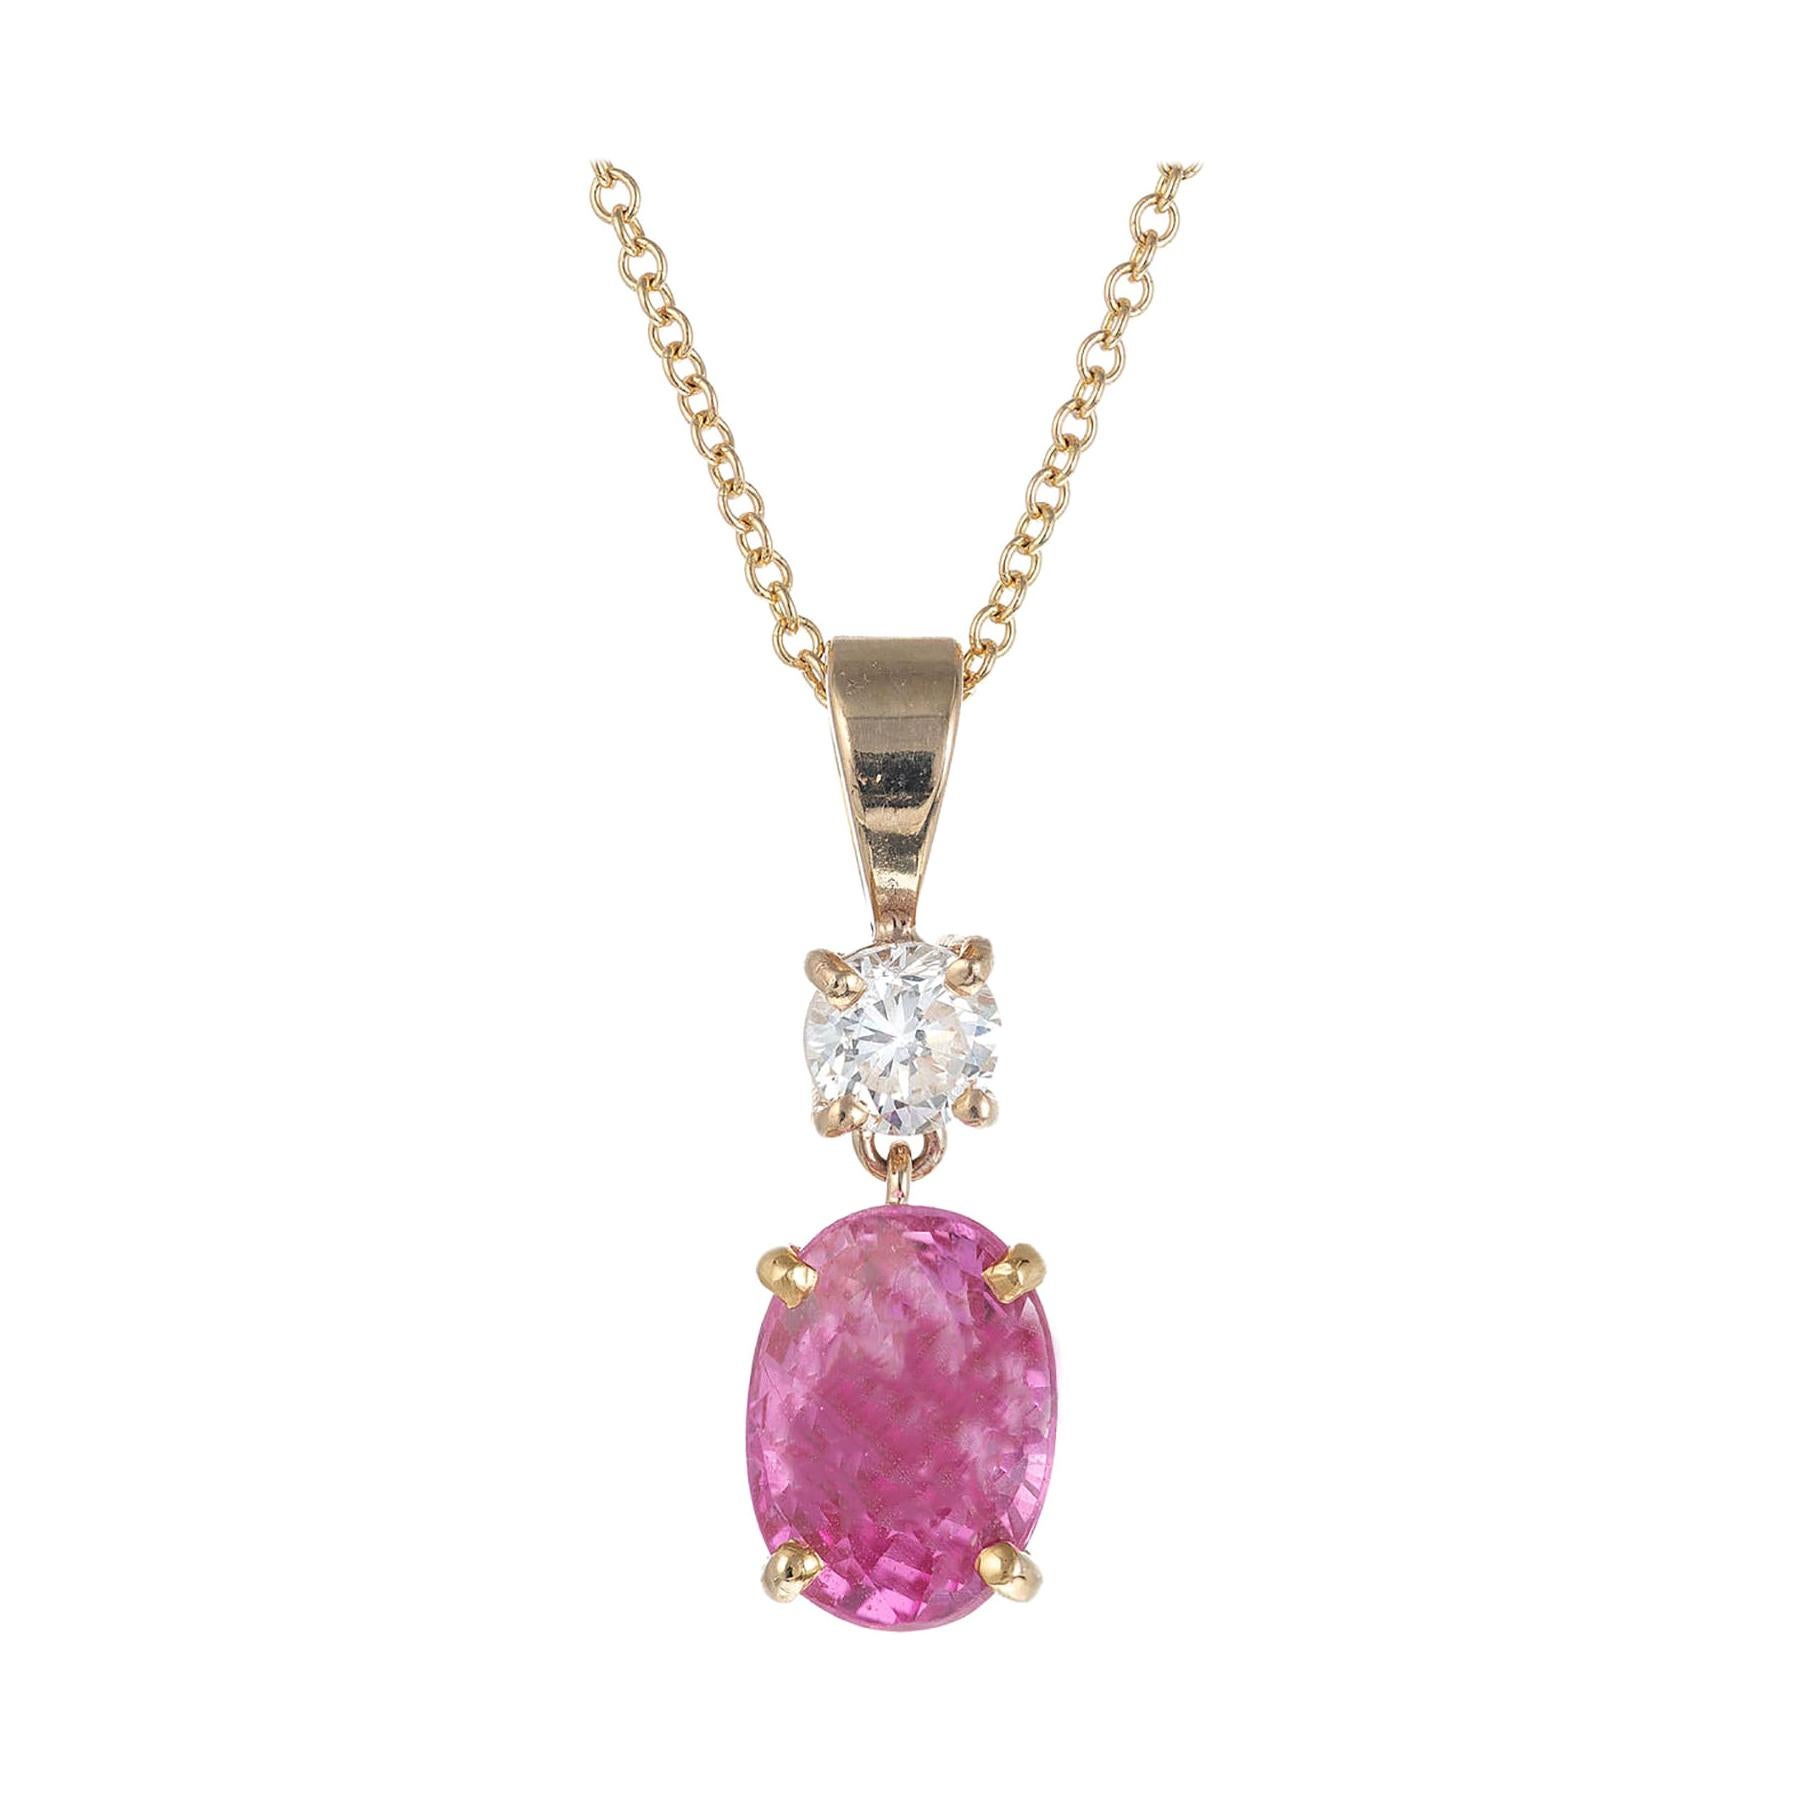 Peter Suchy GIA Certified 2.02 Carat Pink Sapphire Diamond Gold Pendant Necklace